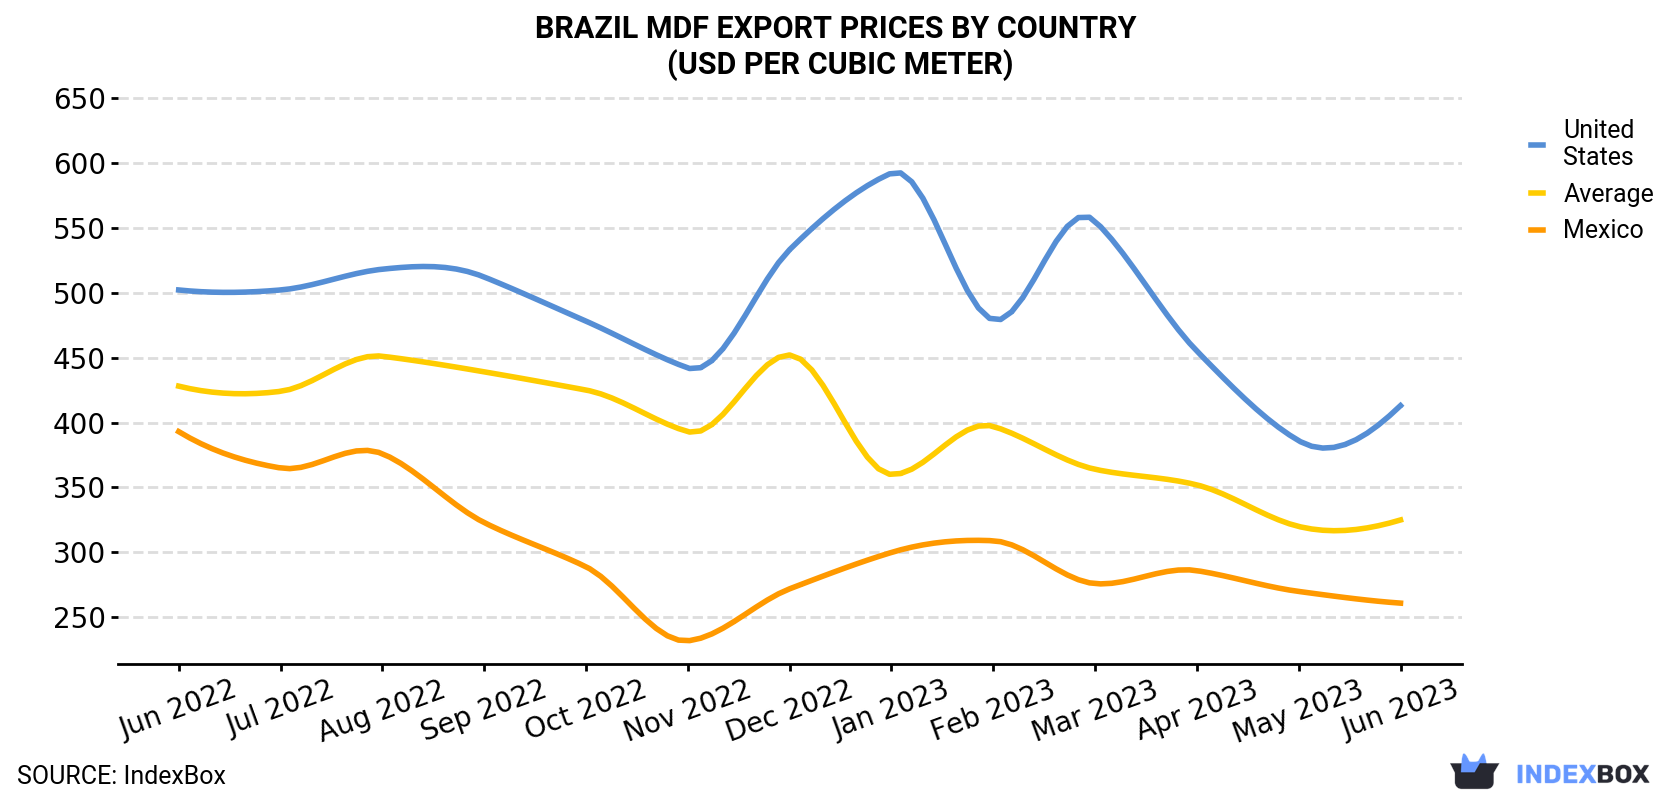 Brazil MDF Export Prices By Country (USD Per Cubic Meter)